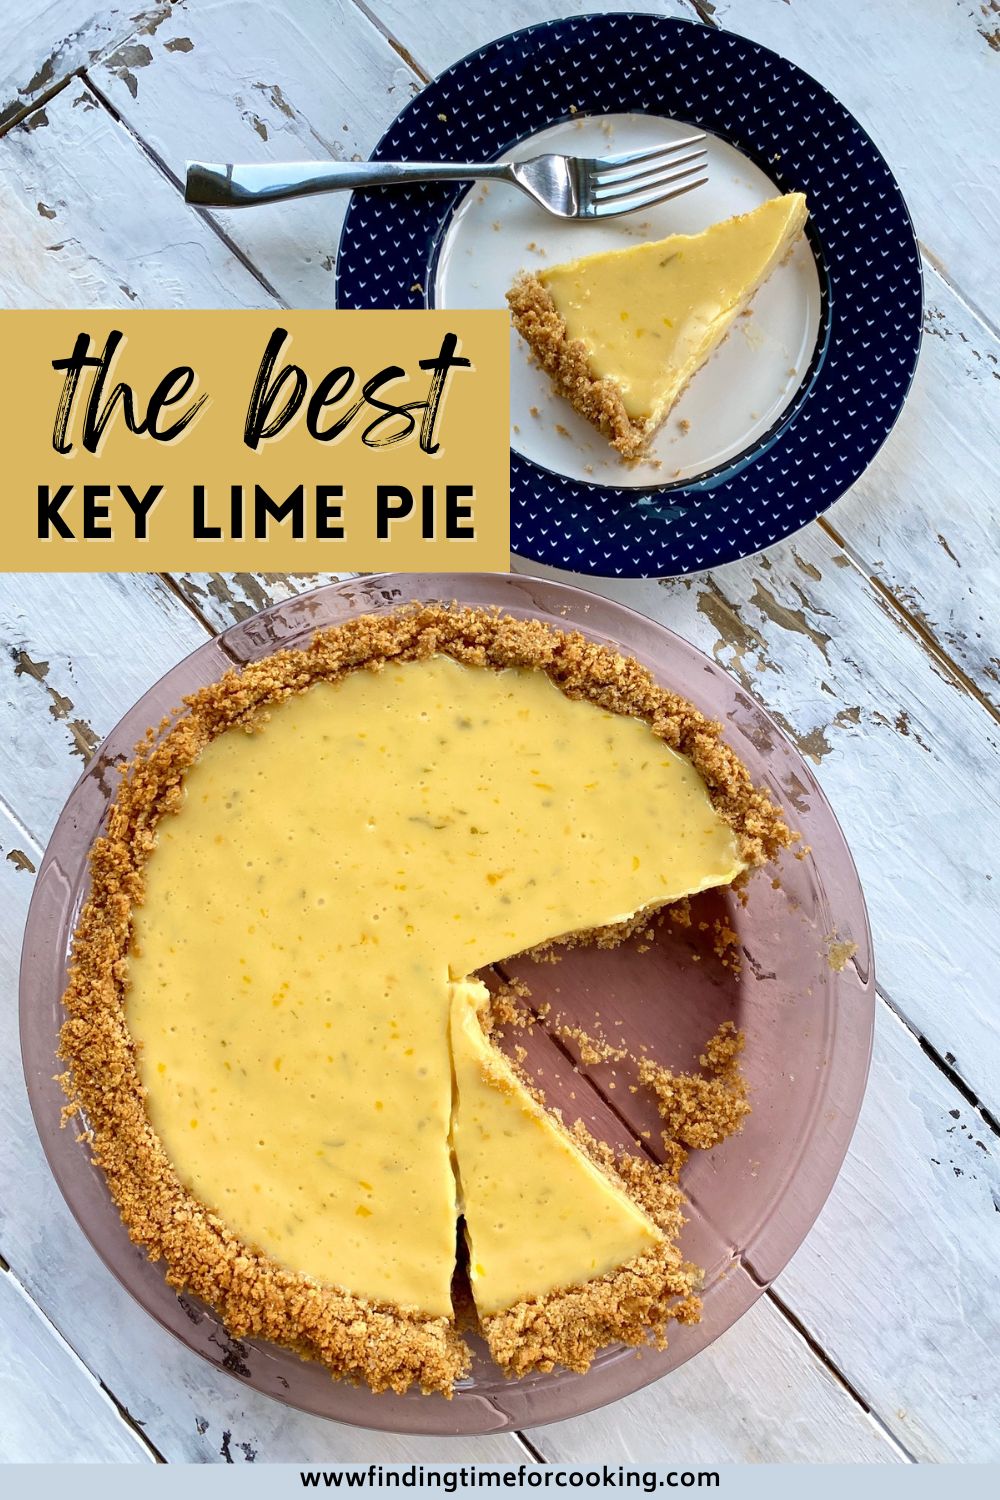 The Best Key Lime Pie Recipe | How to make the best homemade key lime pie...it's so easy! This is a traditional recipe, only a few ingredients & the perfect balance of tart & sweet. Easy key lime pie that doesn't take long to make, how to make key lime pie. A perfect dessert recipe any time of year, dessert ideas for party. #keylime #pie #dessert #grahamcracker #citrus